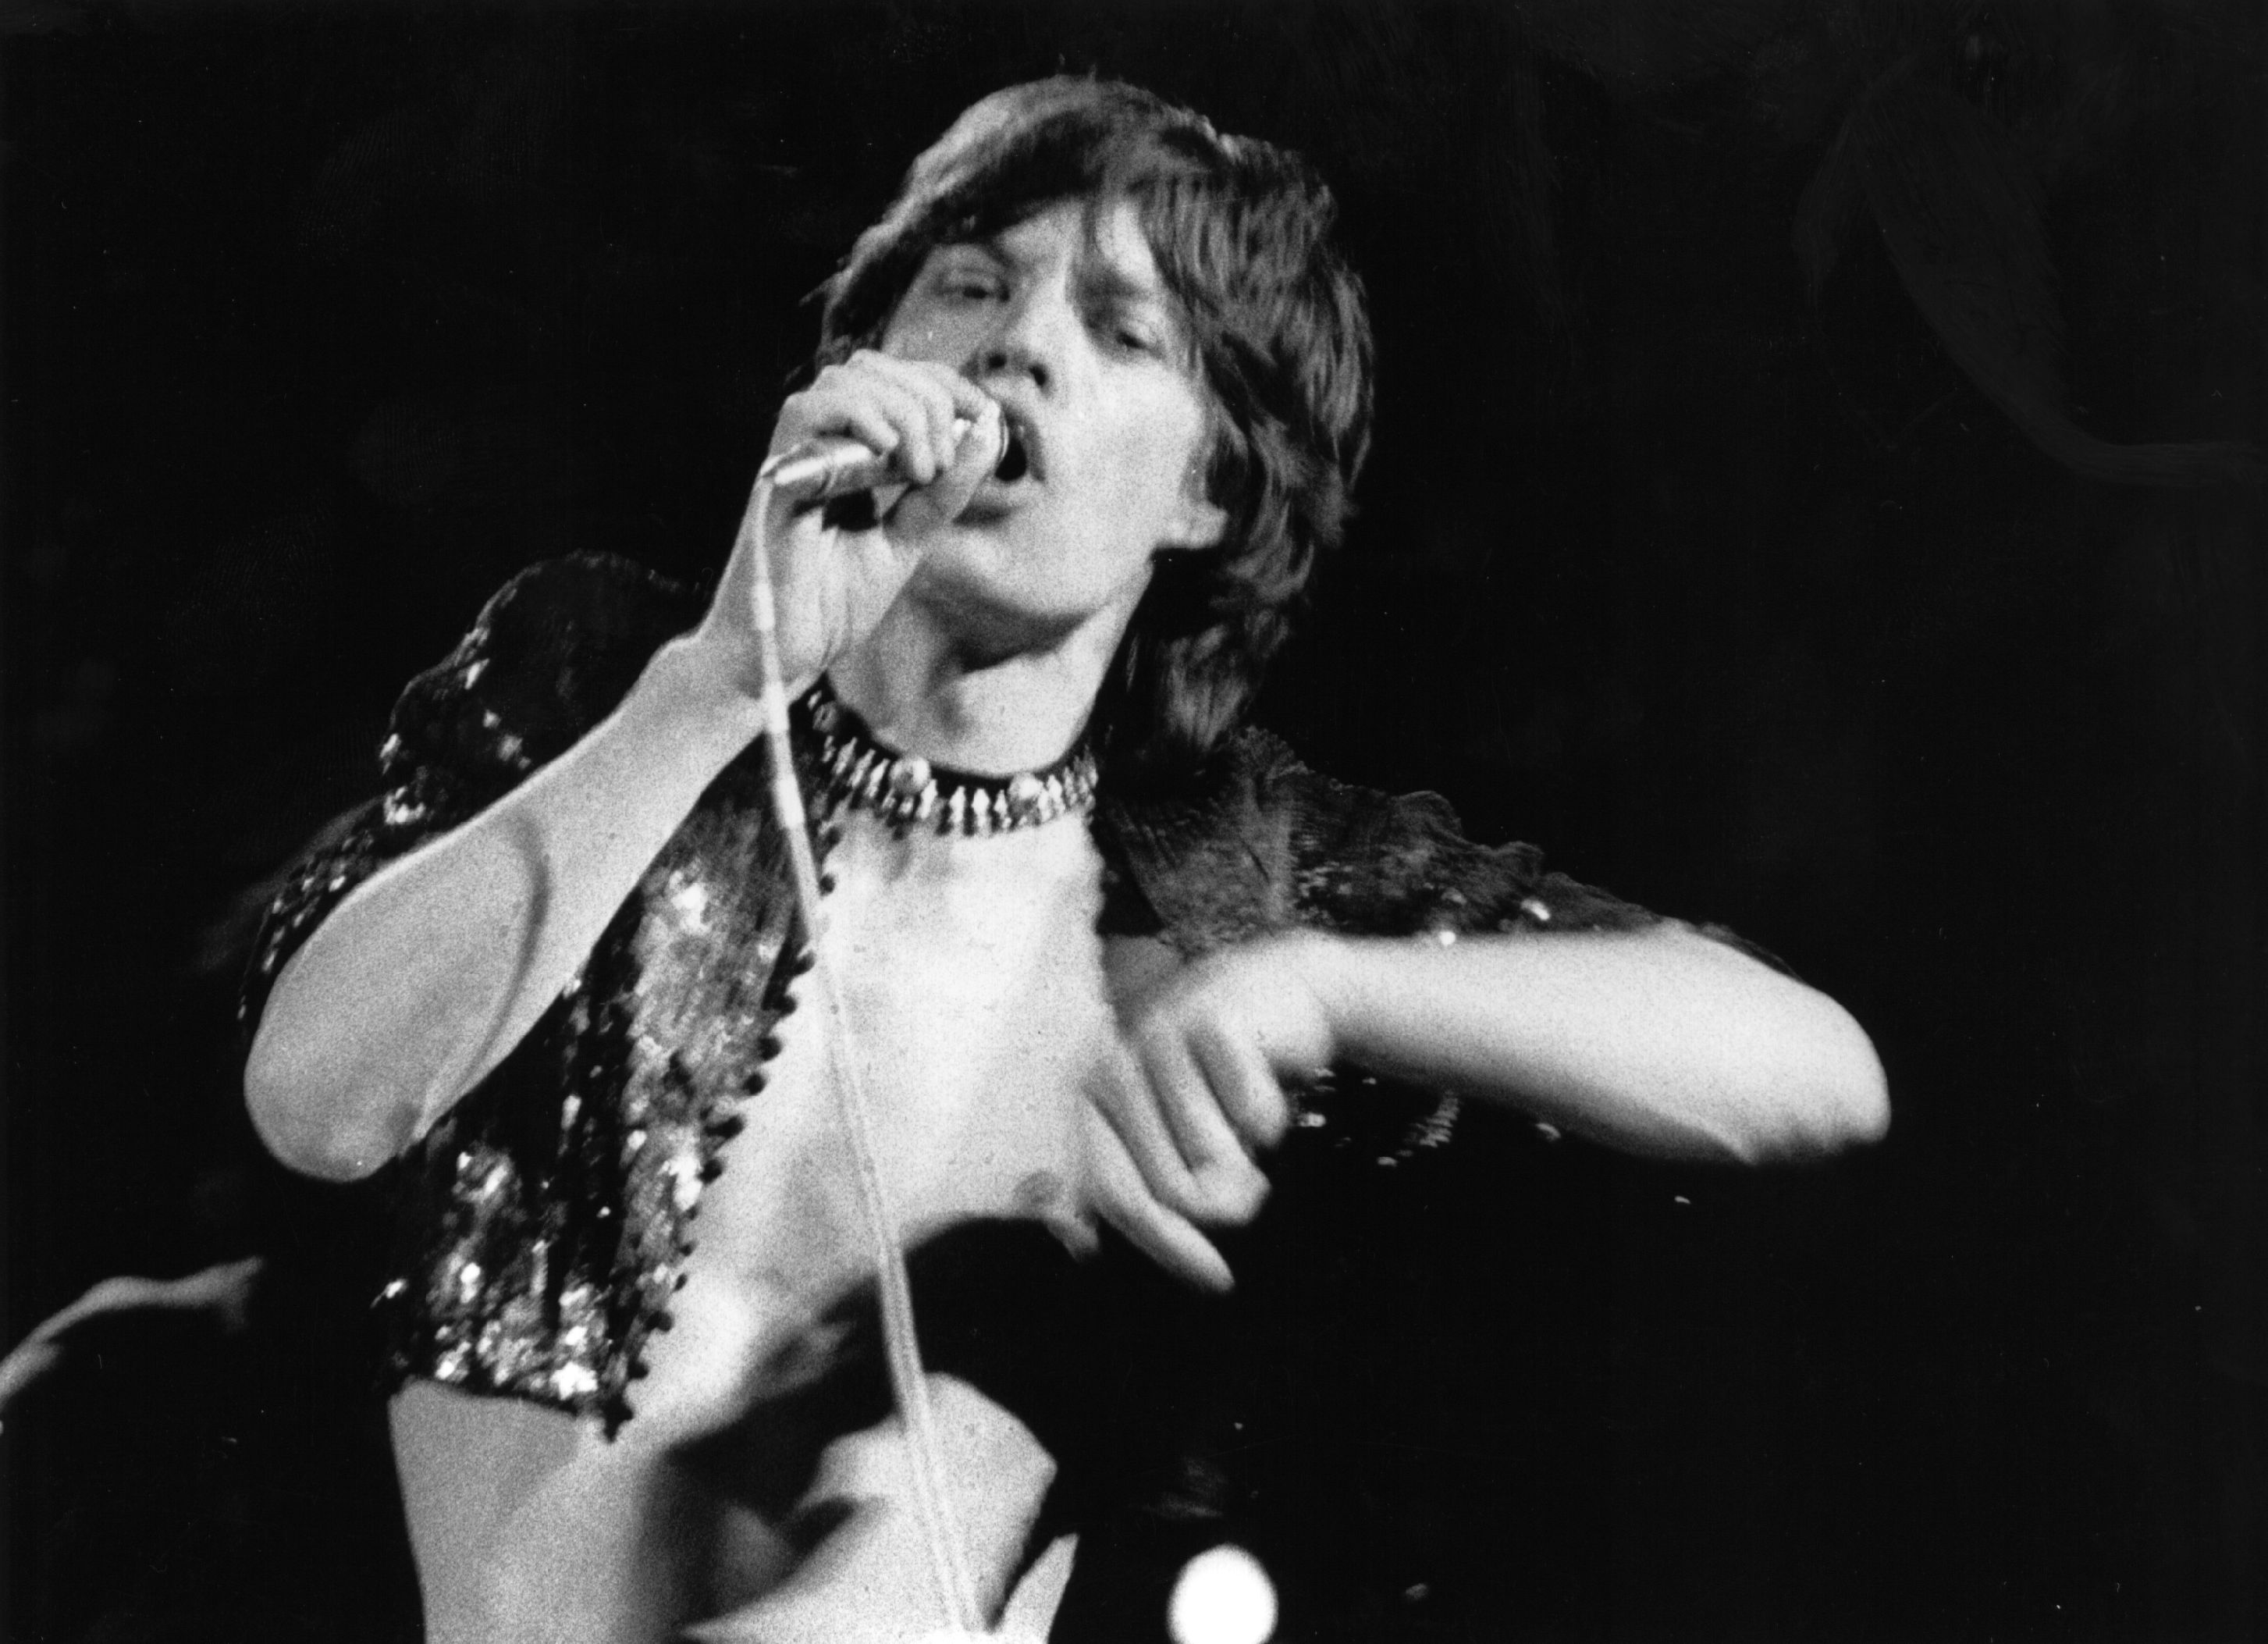 Mick Jagger with a microphone during The Rolling Stones' 'Goats Head Soup'